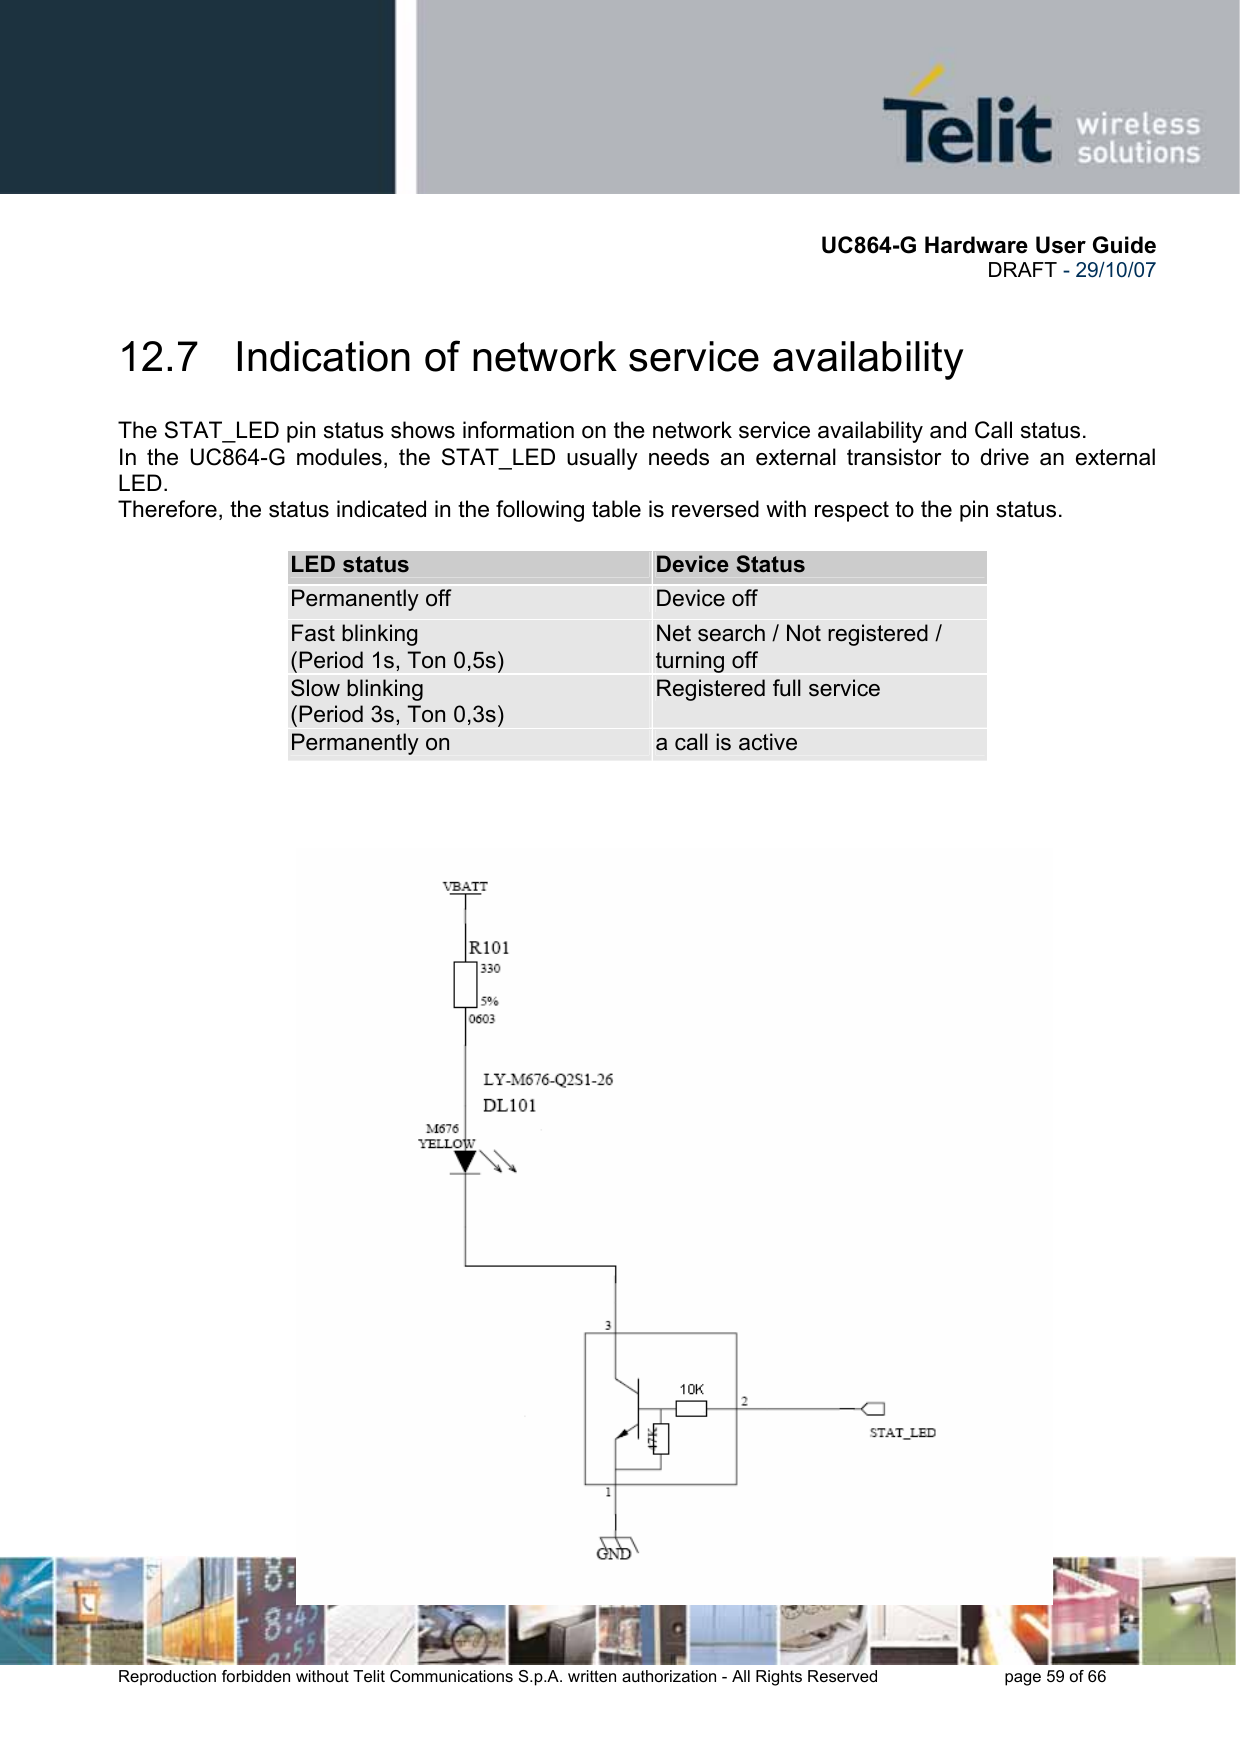       UC864-G Hardware User Guide  DRAFT - 29/10/07      Reproduction forbidden without Telit Communications S.p.A. written authorization - All Rights Reserved    page 59 of 66  12.7   Indication of network service availability The STAT_LED pin status shows information on the network service availability and Call status.  In the UC864-G modules, the STAT_LED usually needs an external transistor to drive an external LED. Therefore, the status indicated in the following table is reversed with respect to the pin status.             LED status  Device Status Permanently off  Device off Fast blinking  (Period 1s, Ton 0,5s) Net search / Not registered / turning off Slow blinking (Period 3s, Ton 0,3s) Registered full service Permanently on  a call is active        